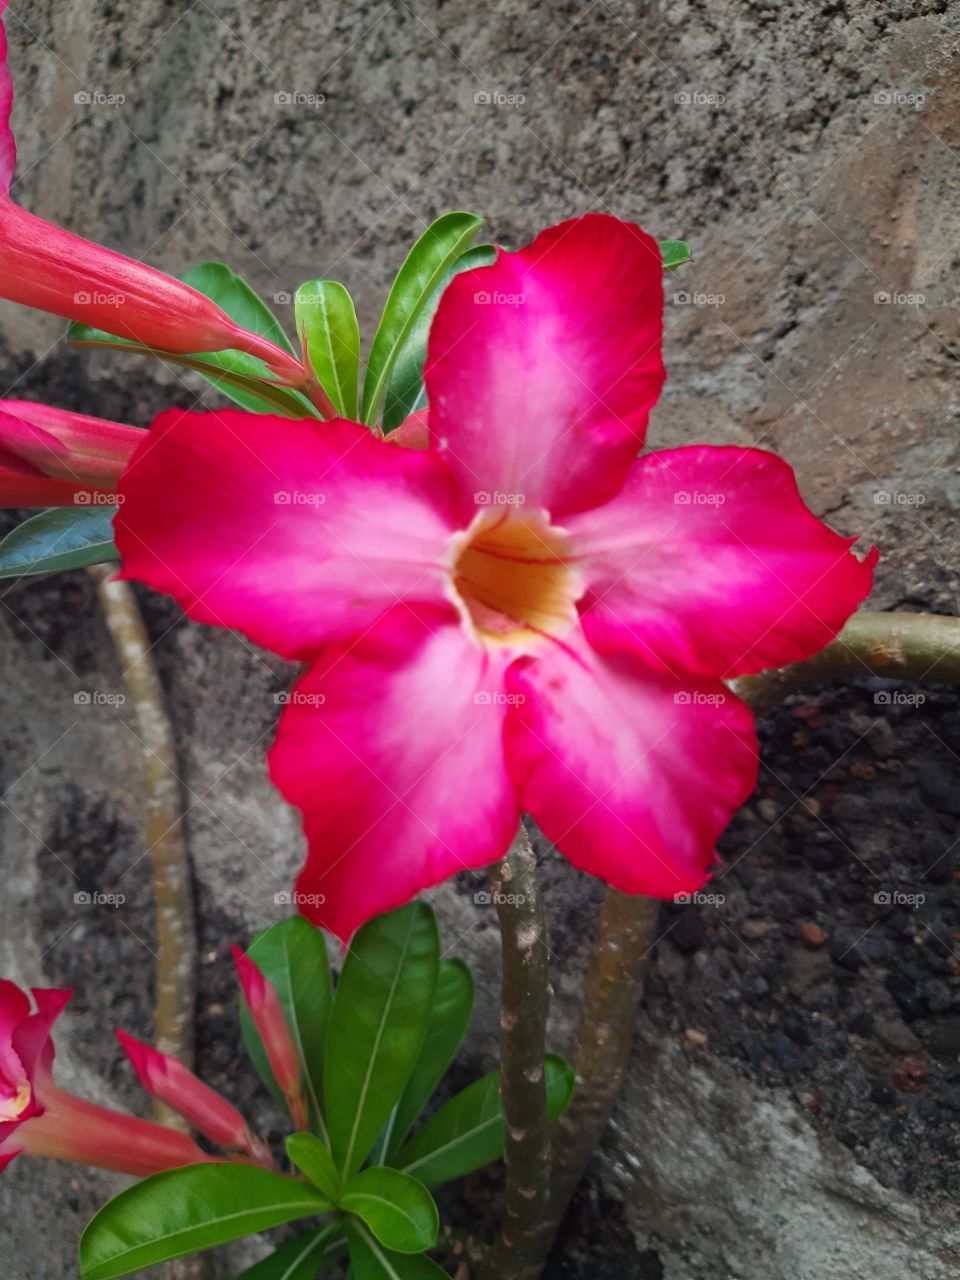 A pink flower whose scientific name is adenium obesum. In Balinese, it is known as "Jepun Jepang" and used as decorative plants.